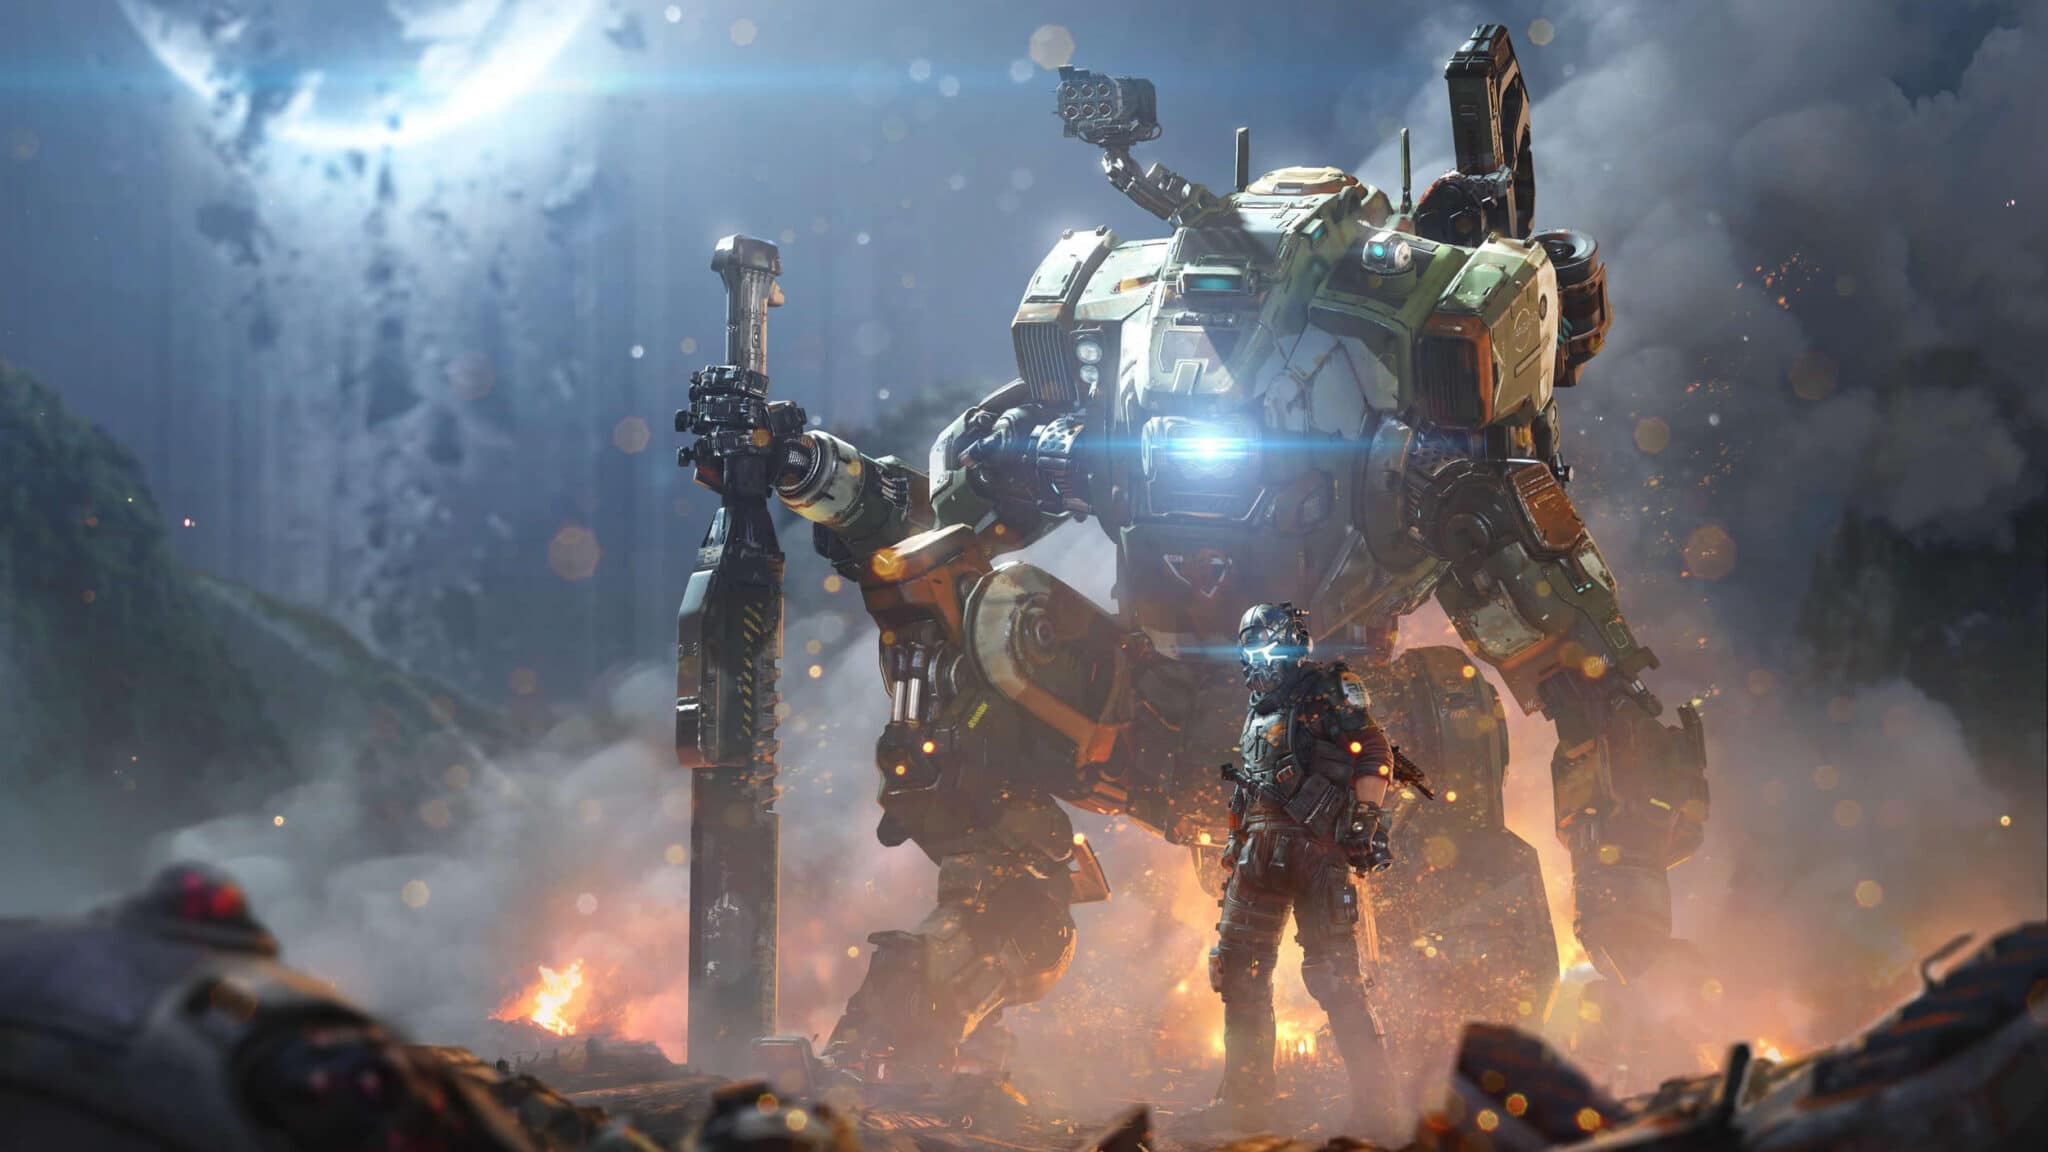 Prepare for Titanfall: Titanfall 3 is in the works